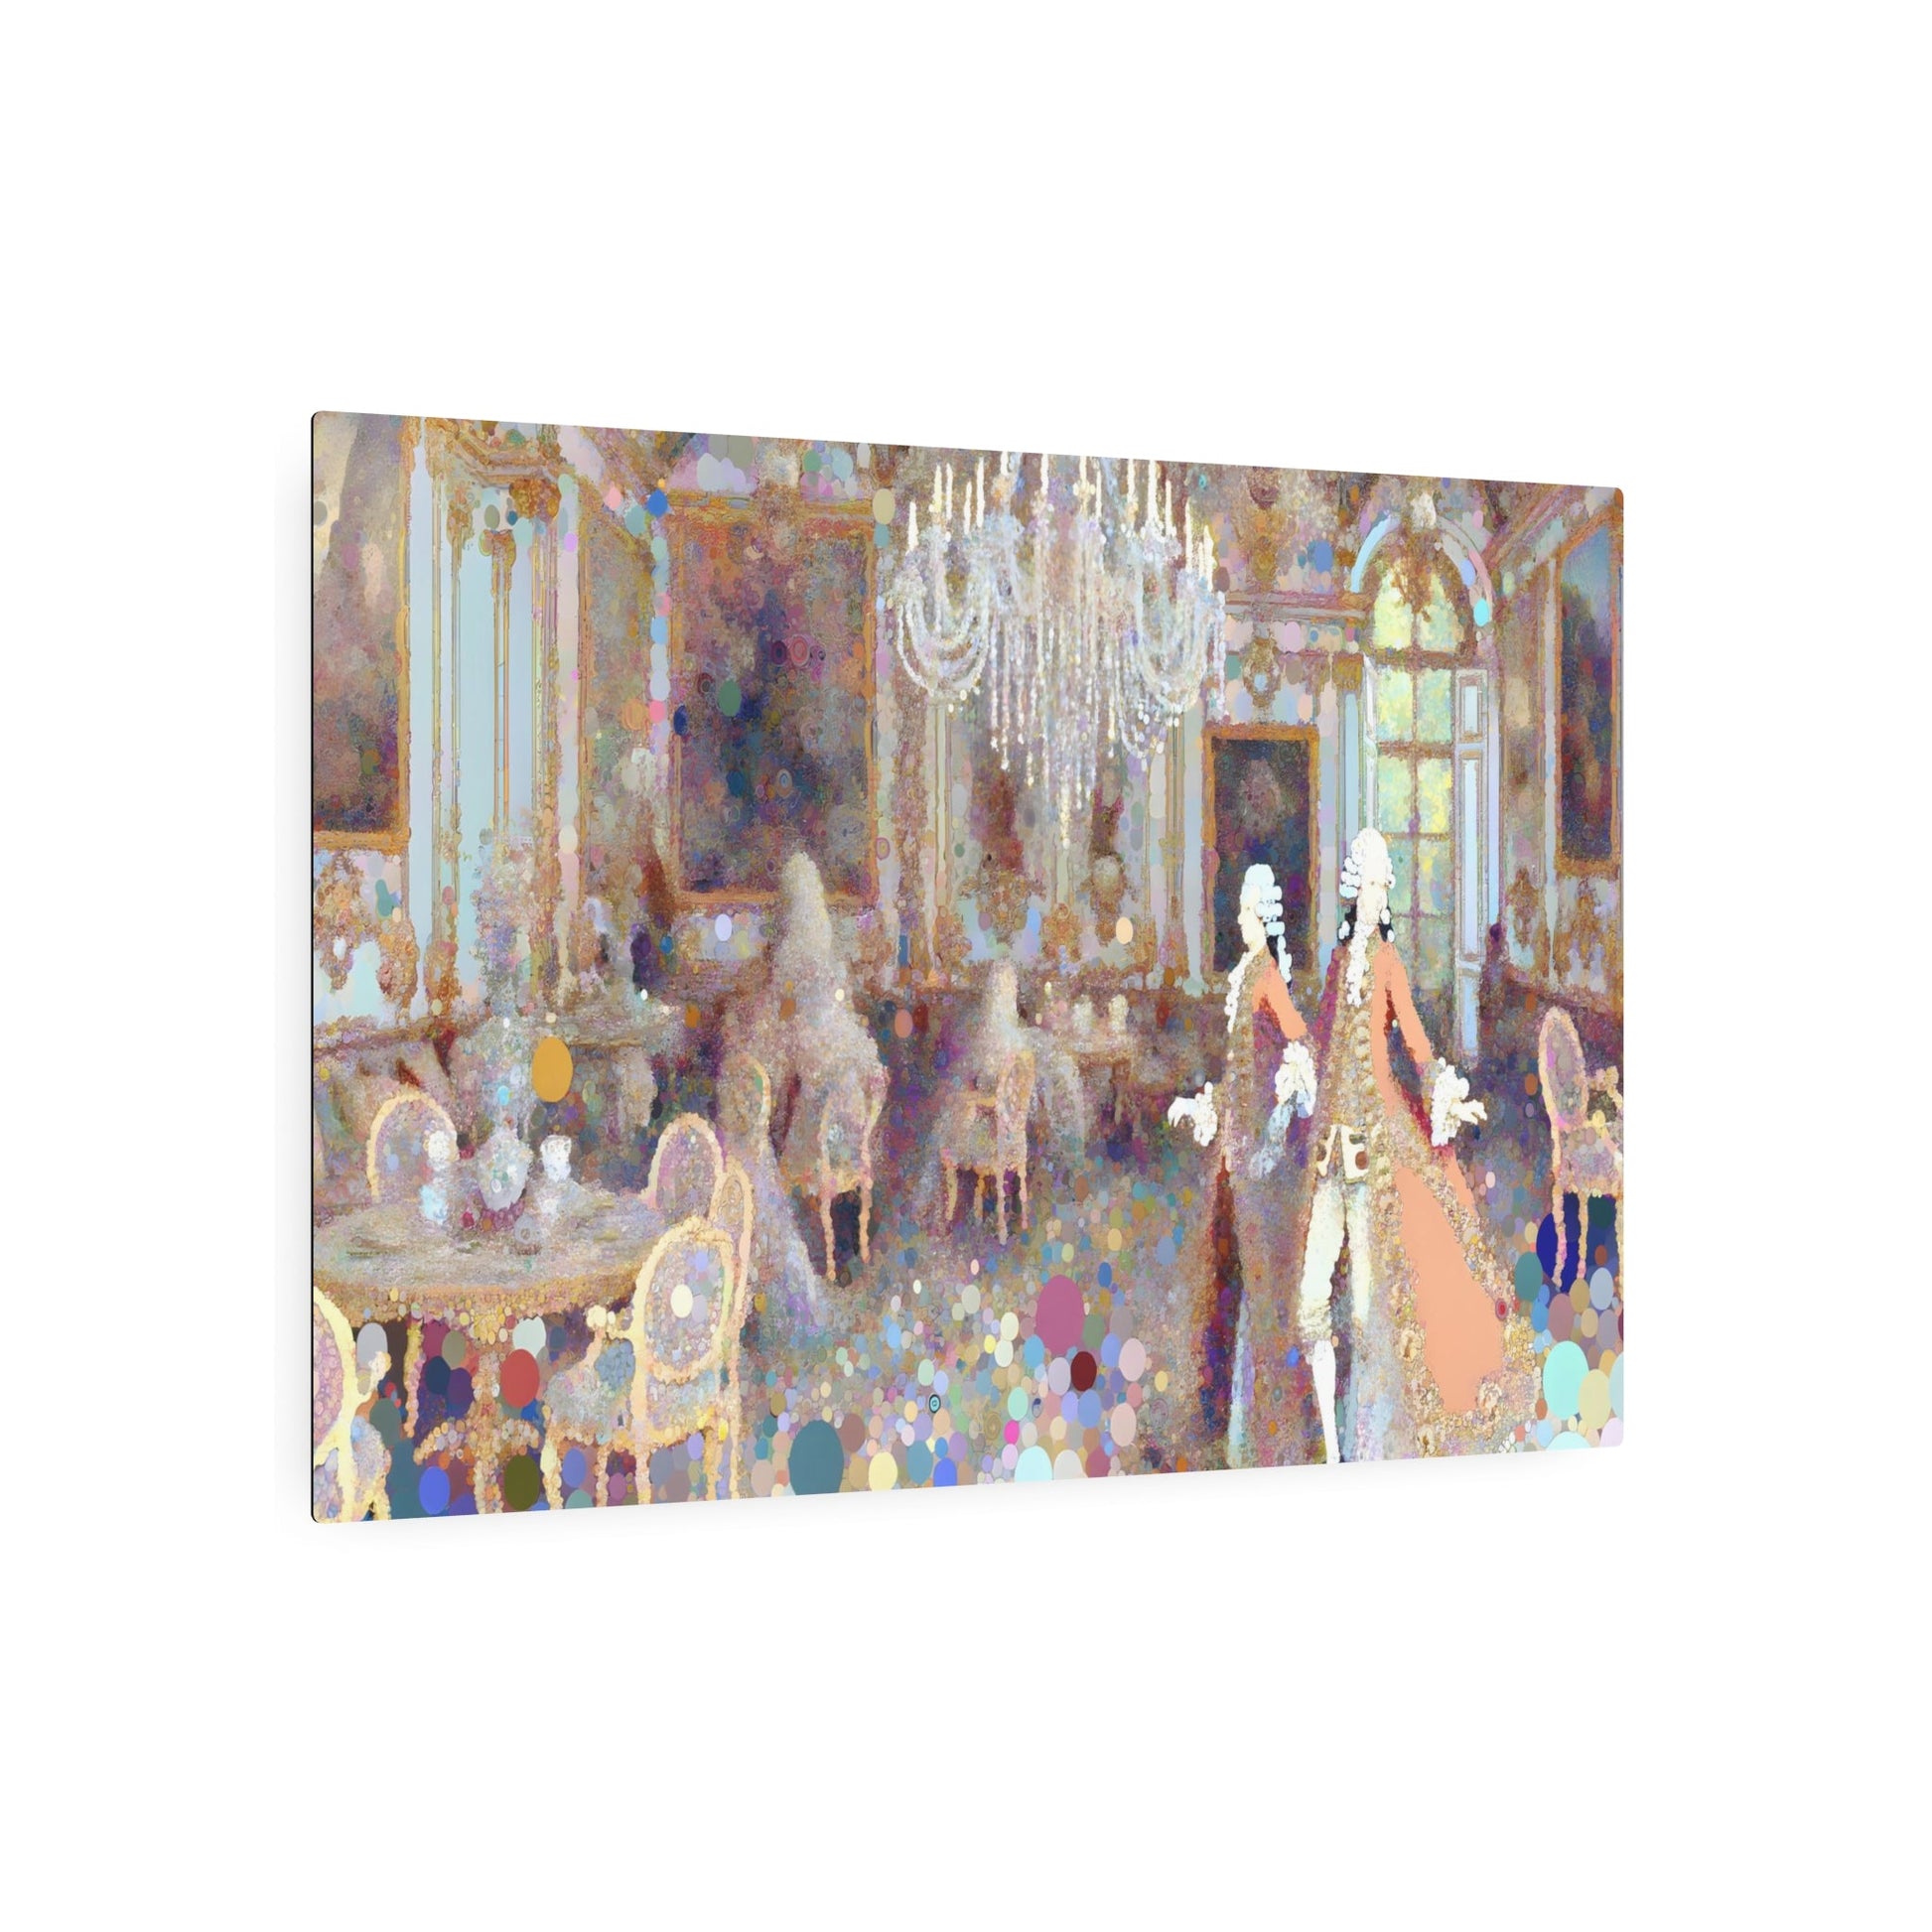 Metal Poster Art | "Rococo Art Style-Inspired Intricate Detail & Playful Themes Western Artwork in Pastel Colors" - Metal Poster Art 36″ x 24″ (Horizontal) 0.12''